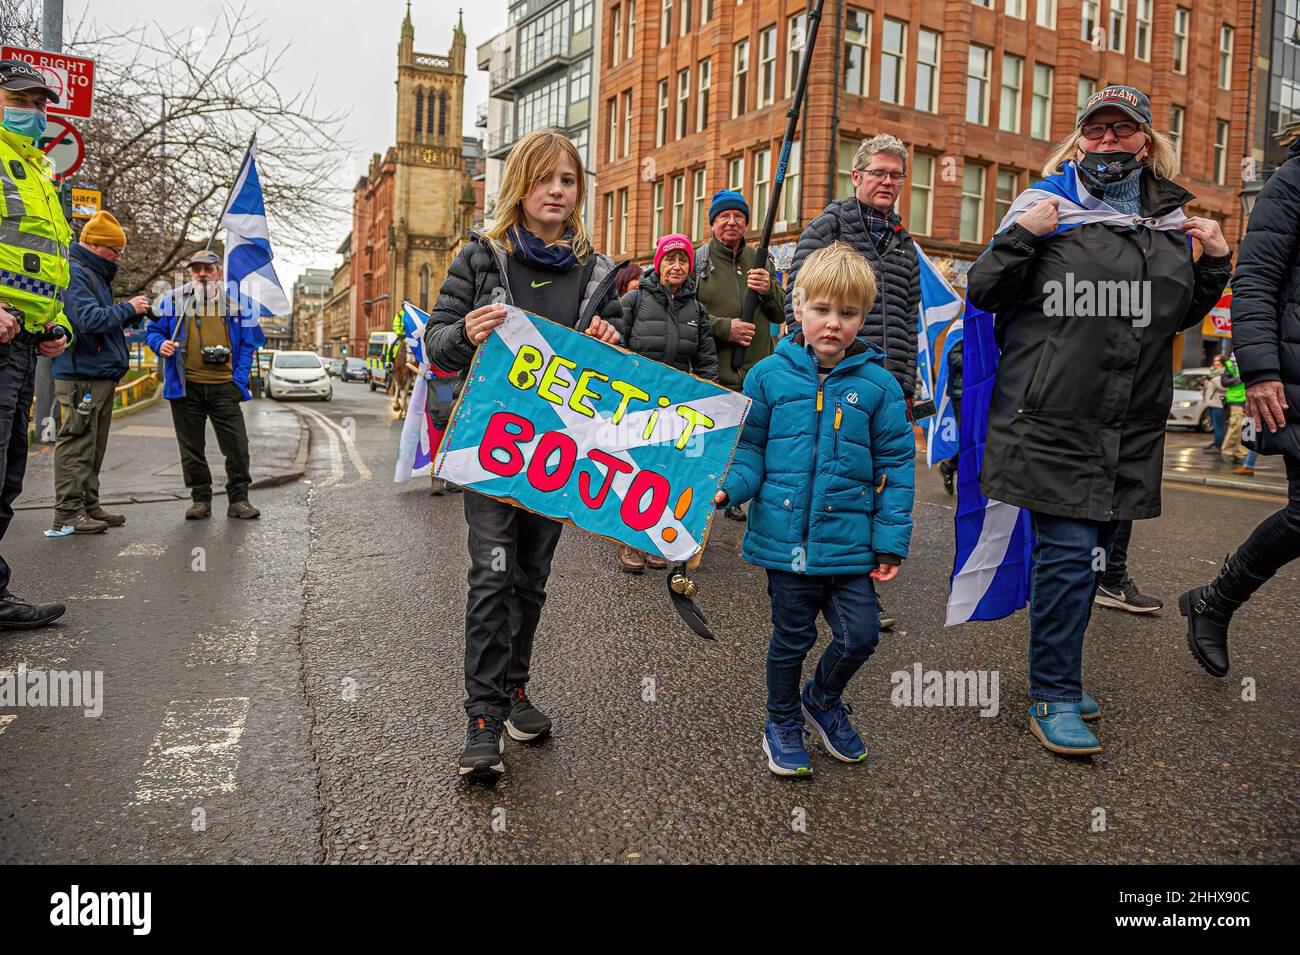 Children are seen holding a placard that says 'BEET IT BOJO!' during the demonstration.1,000 supporters came out in support of the Scottish Independence following the news that UK Prime Minister, Boris Johnson held numerous parties and gatherings at 10 Downing Street during the Coronavirus lockdowns despite laws and bills being introduced to curb the spread of the virus. (Photo by Stewart Kirby / SOPA Images/Sipa USA) Stock Photo